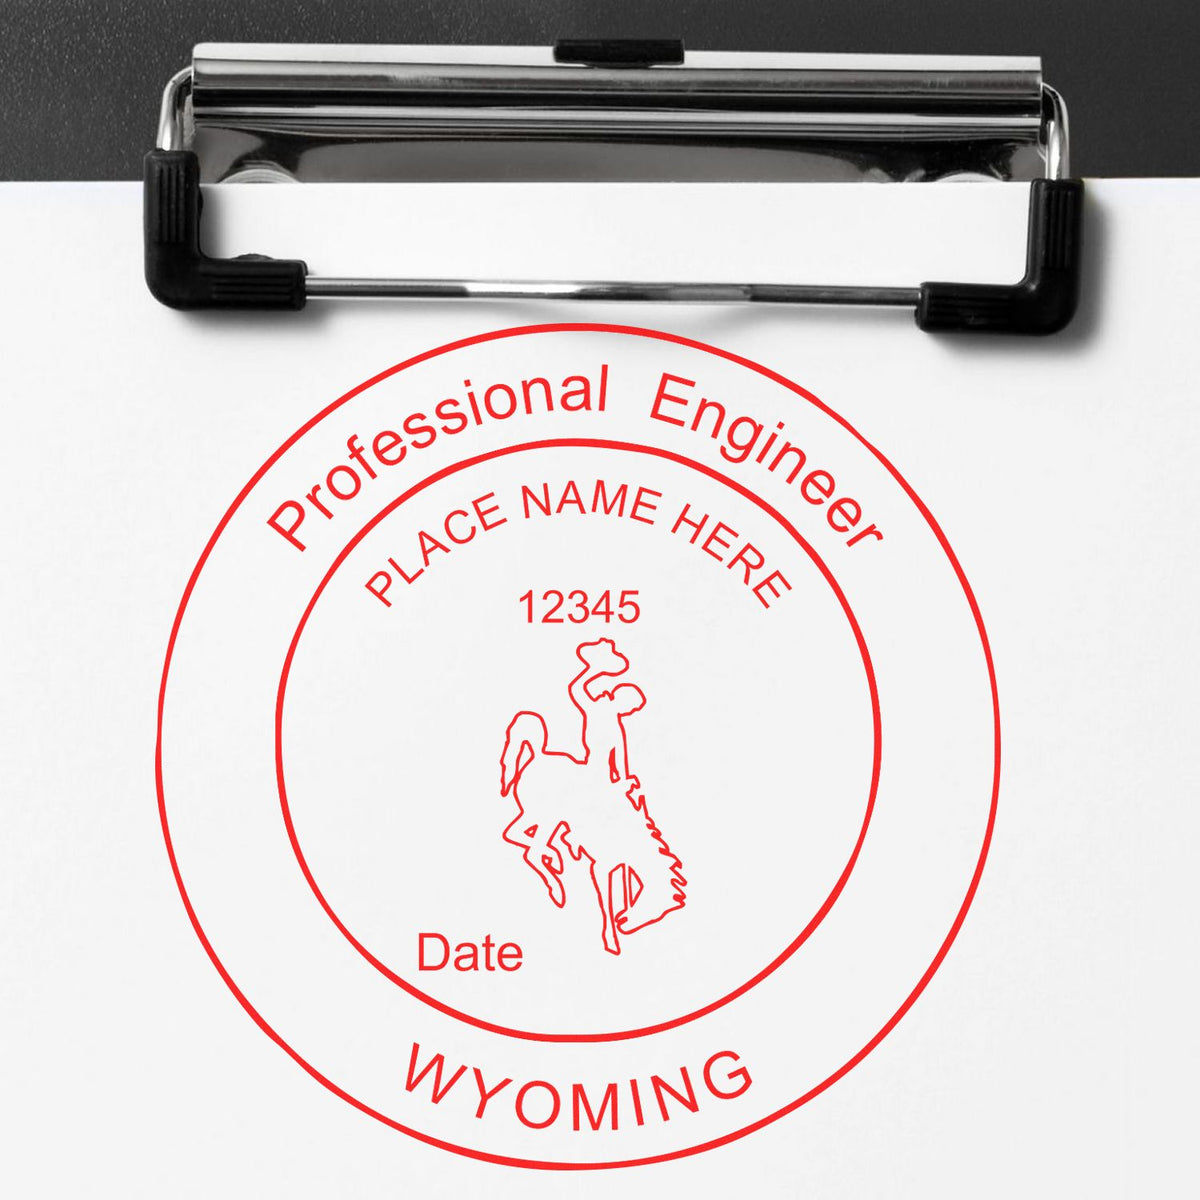 A photograph of the Slim Pre-Inked Wyoming Professional Engineer Seal Stamp stamp impression reveals a vivid, professional image of the on paper.